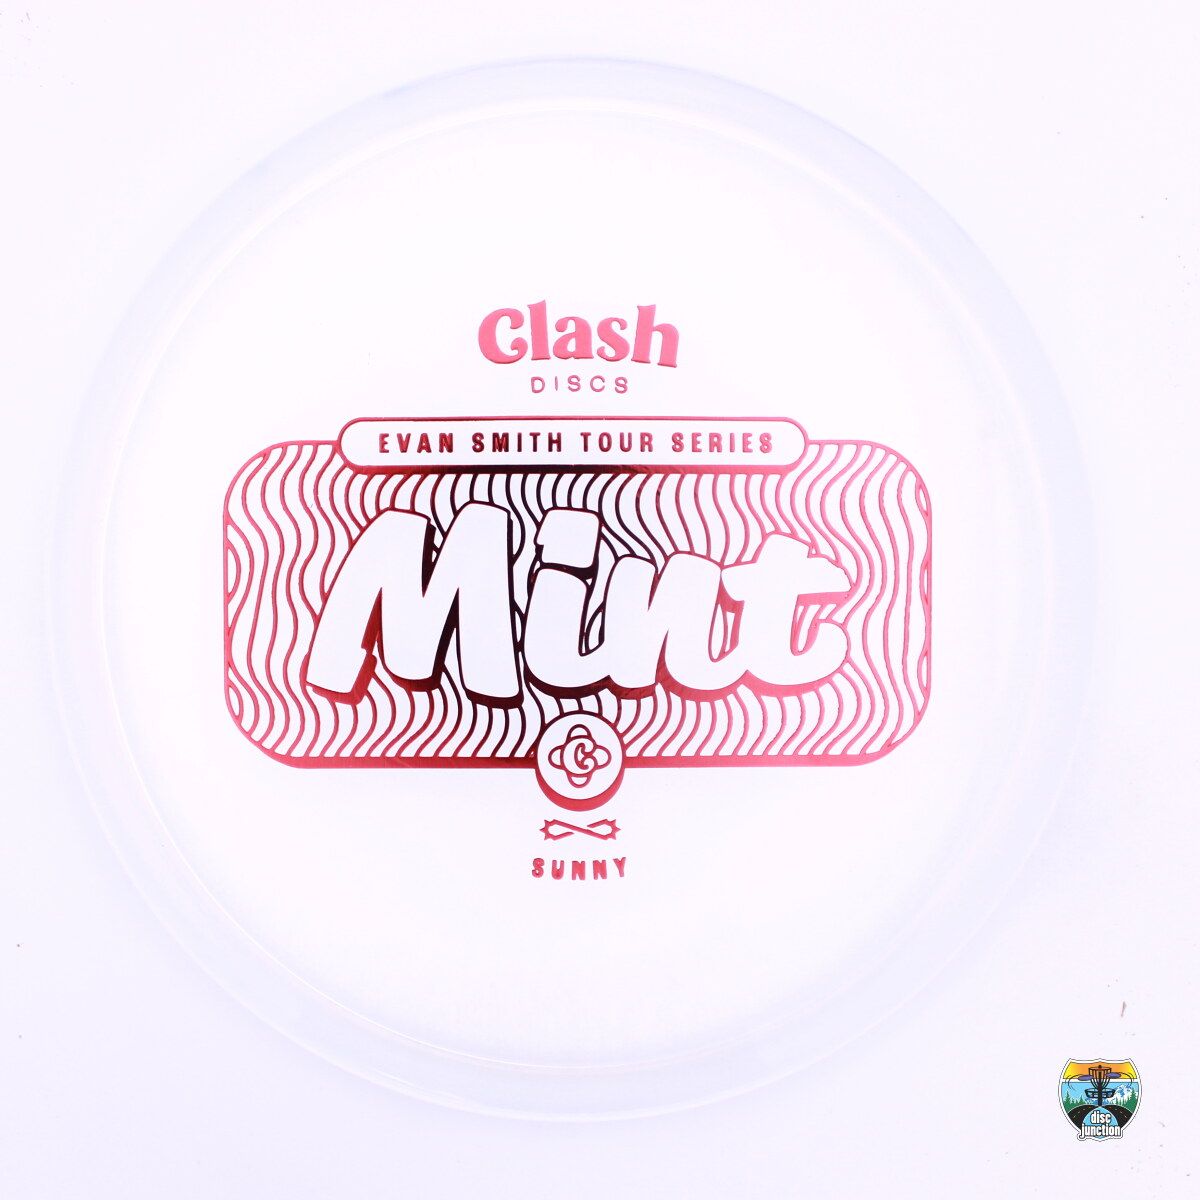 Clash Discs Sunny Mint 2024 Tour Series Evan Smith, Manufacturer Weight Range: 173-176 Grams, Color: Clear, Serial Number: 0204-0028